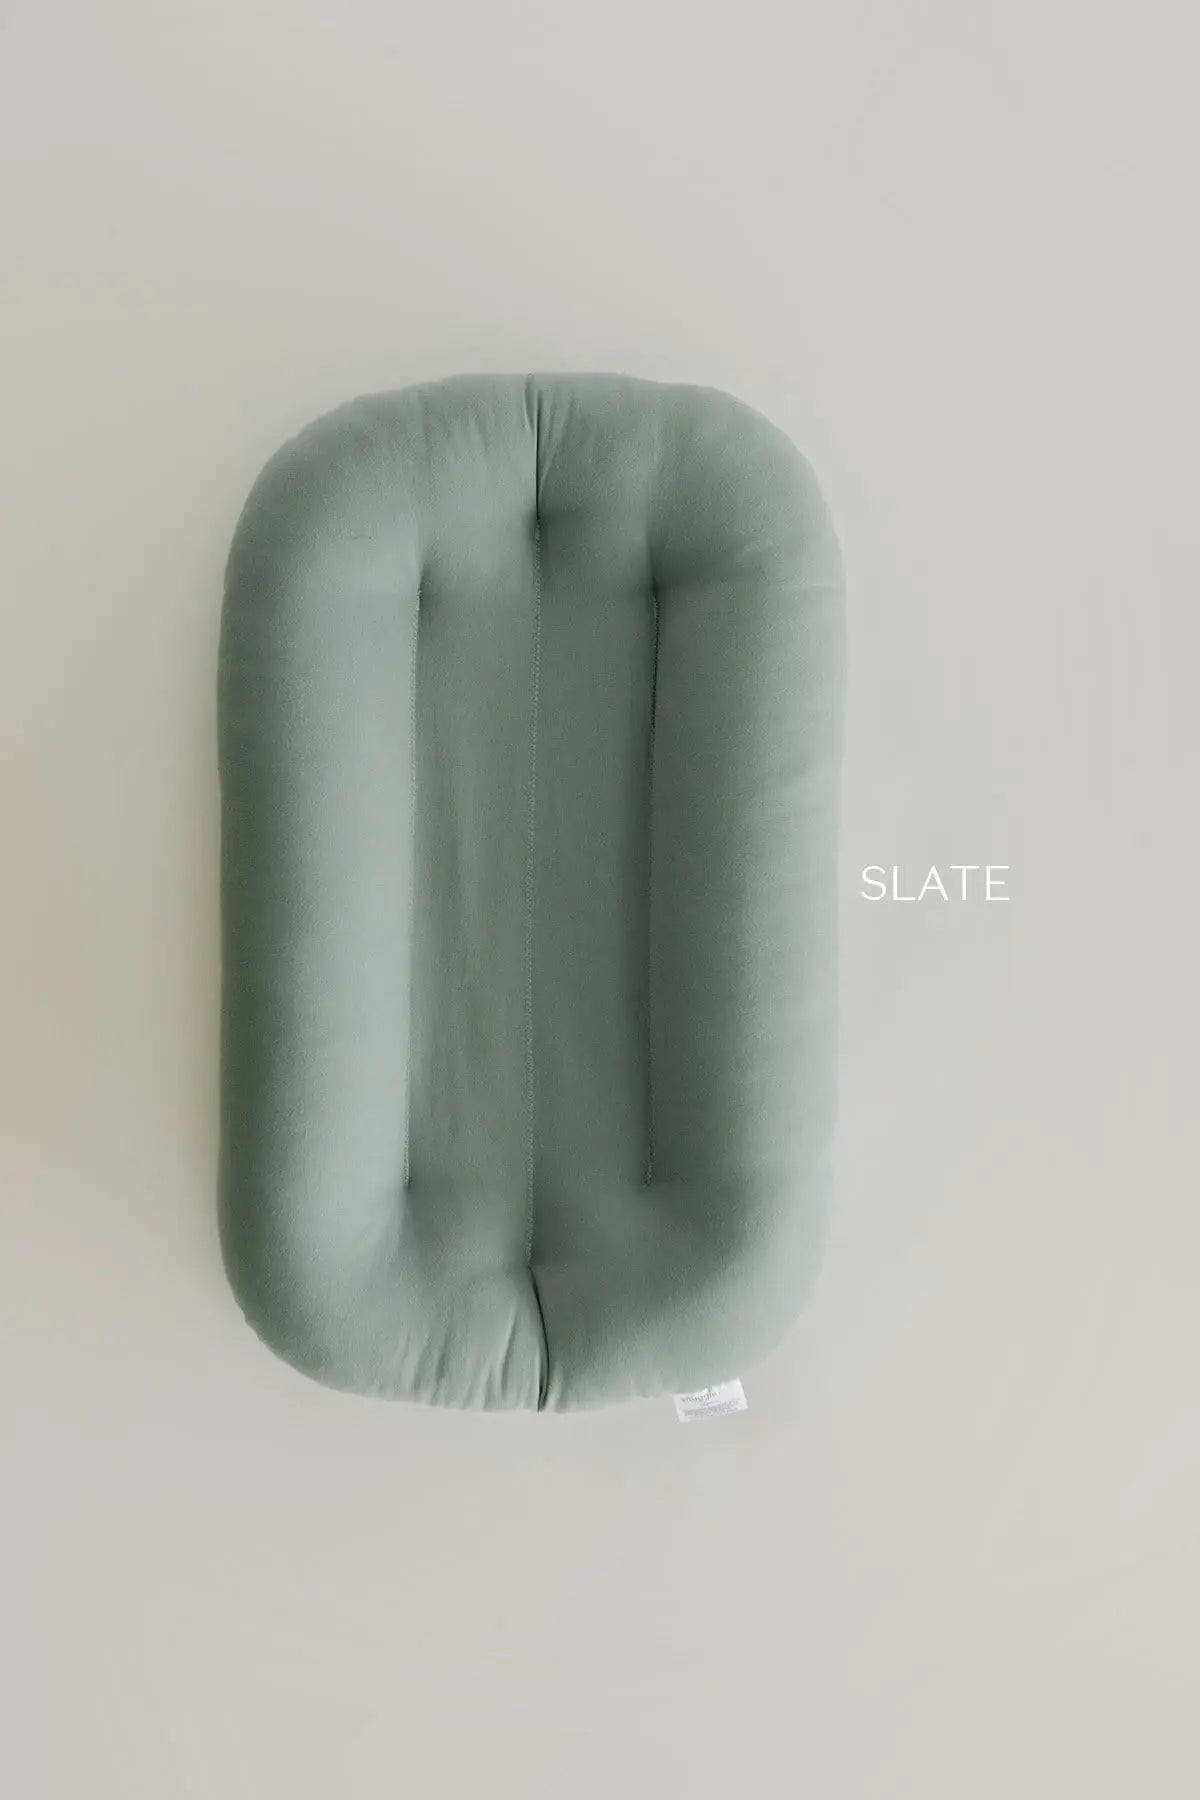 Baby nest Snuggle Me Organic Bare Lounger for baby - Slate Snuggle Me 249.00